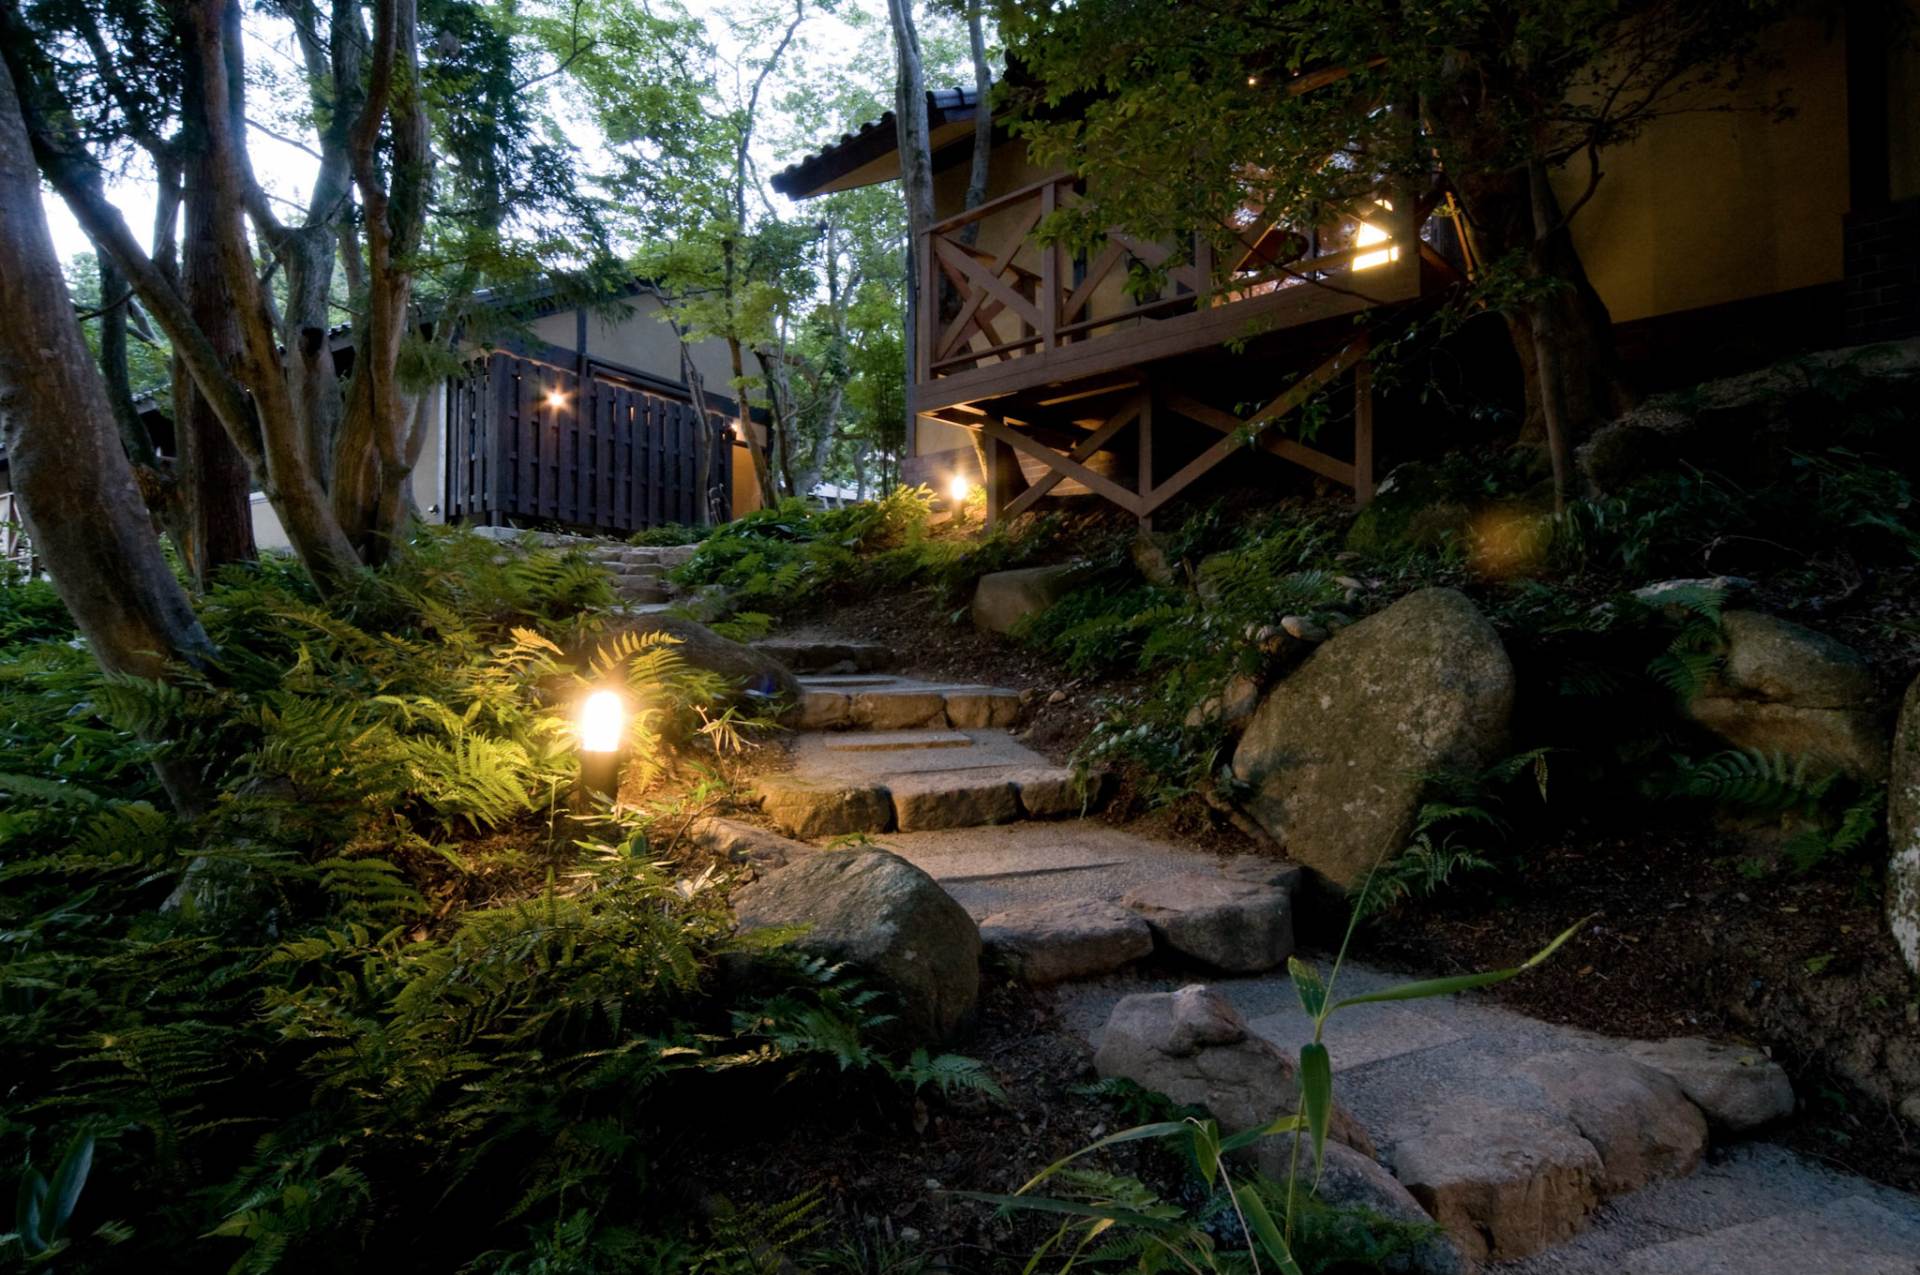 The lush grounds are over 4,500 m2, with guest rooms in stand-alone mountain huts dotting the land.